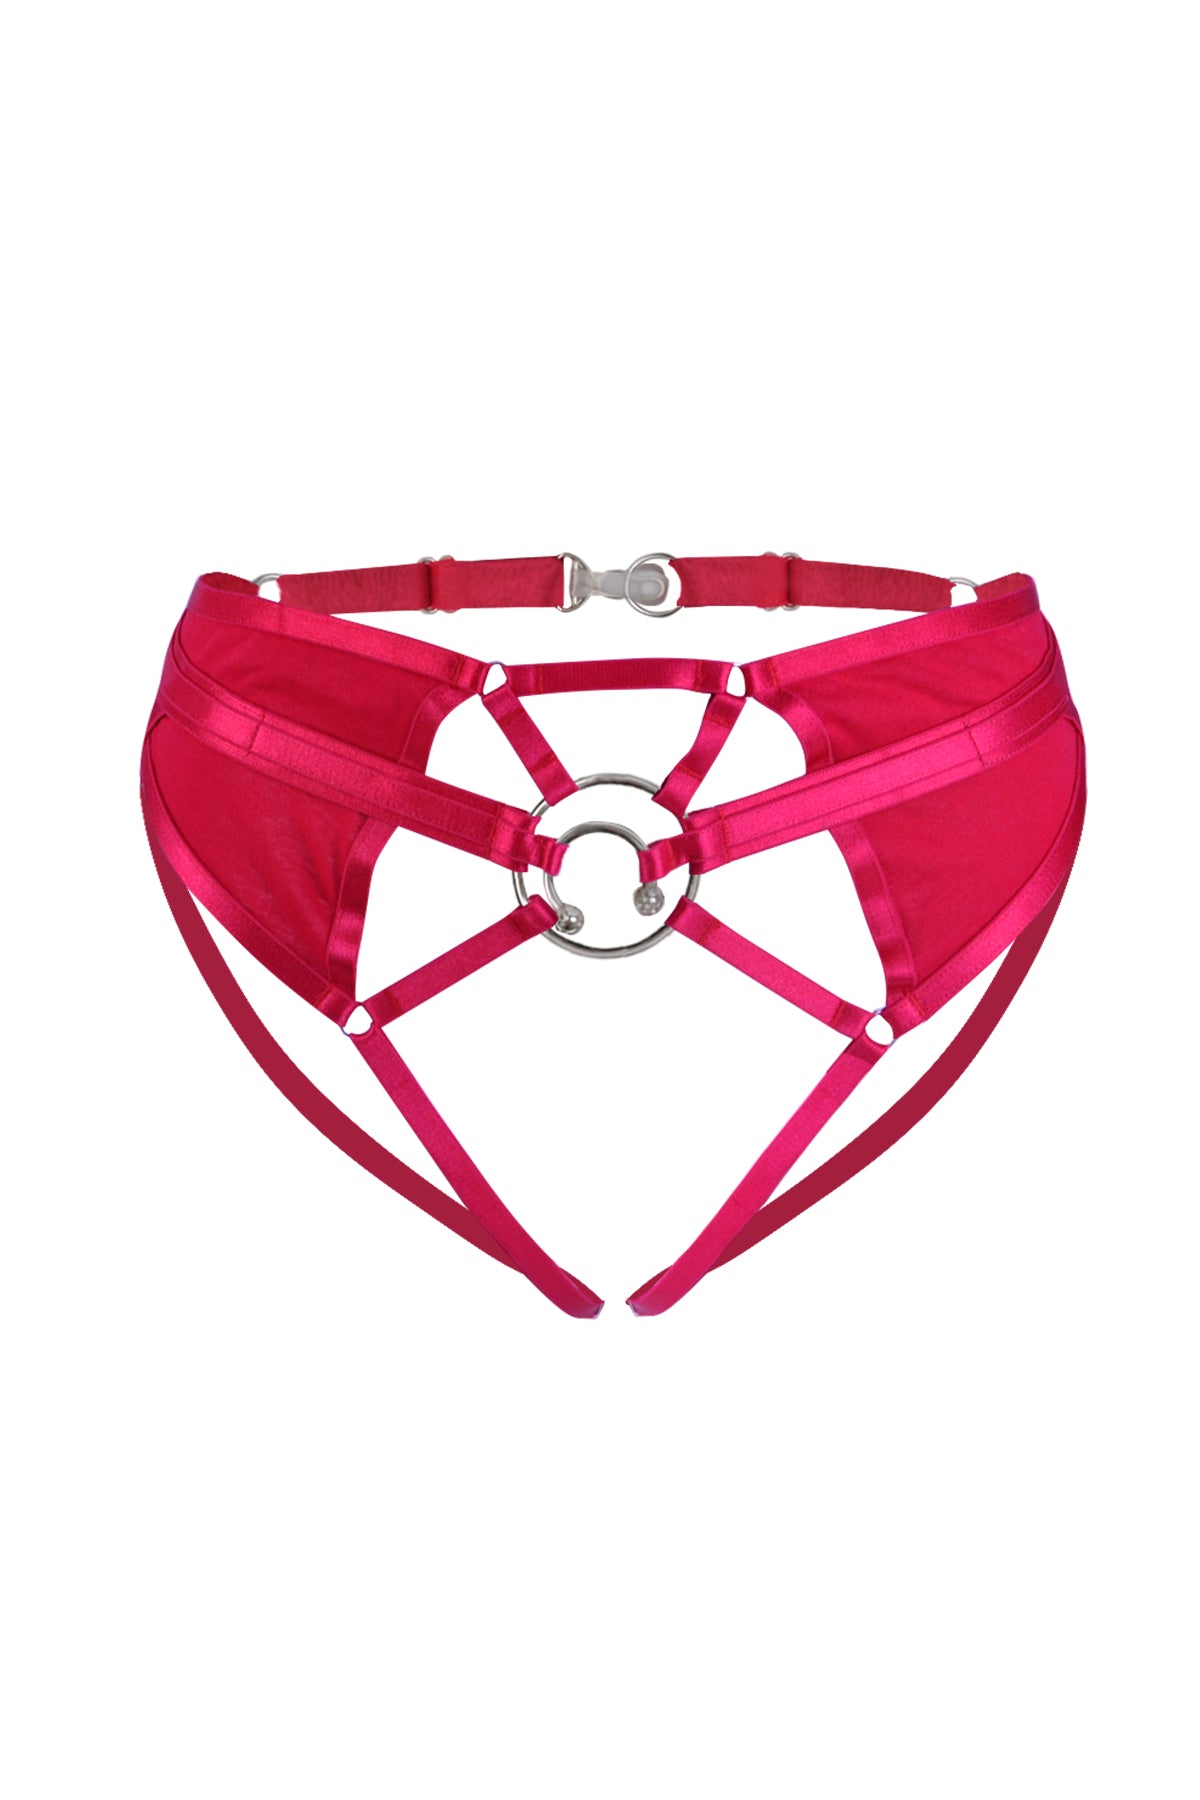 Last Day of Magic Waist Harness In Red